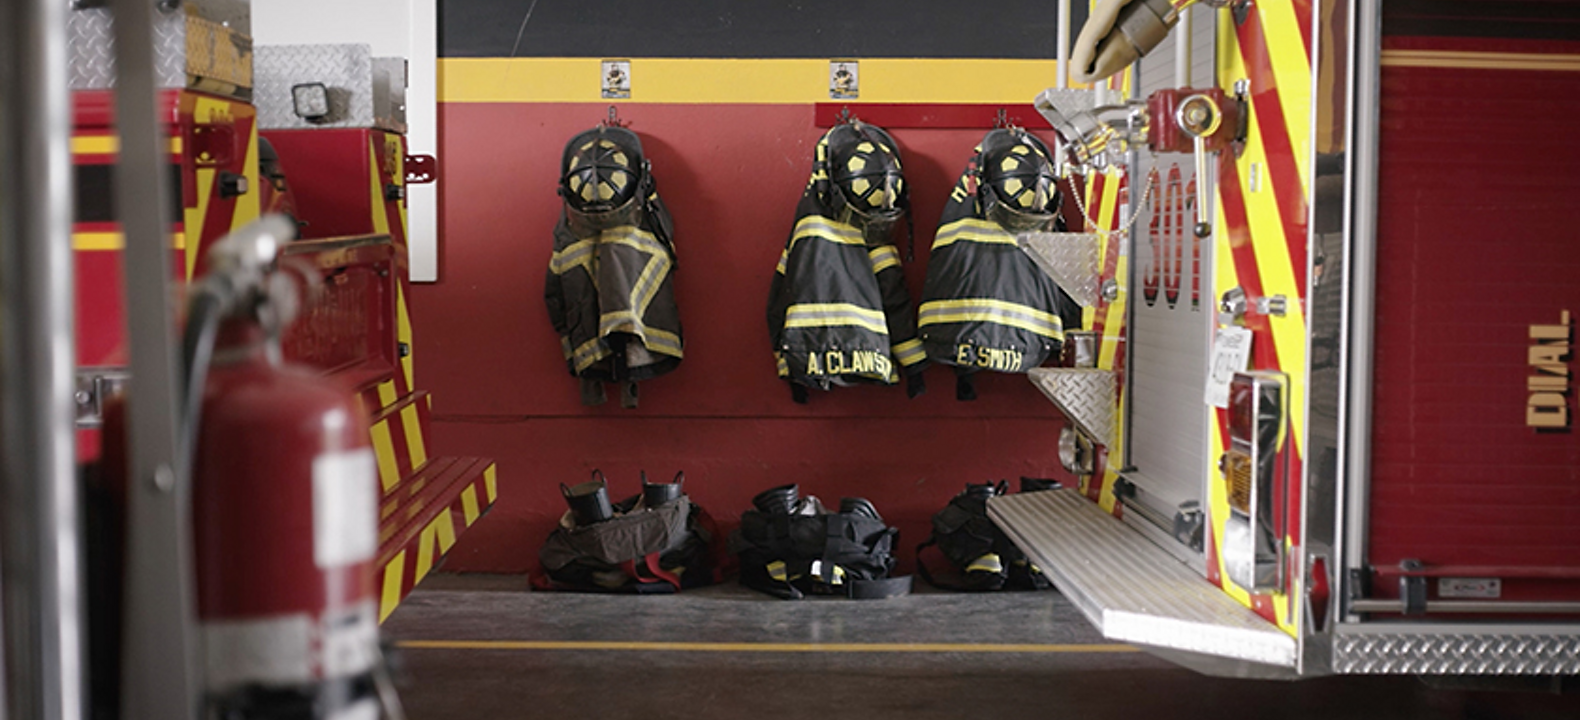 The back of a fire truck inside a fire station with firefighter gear hanging on a wall and boots on the floor